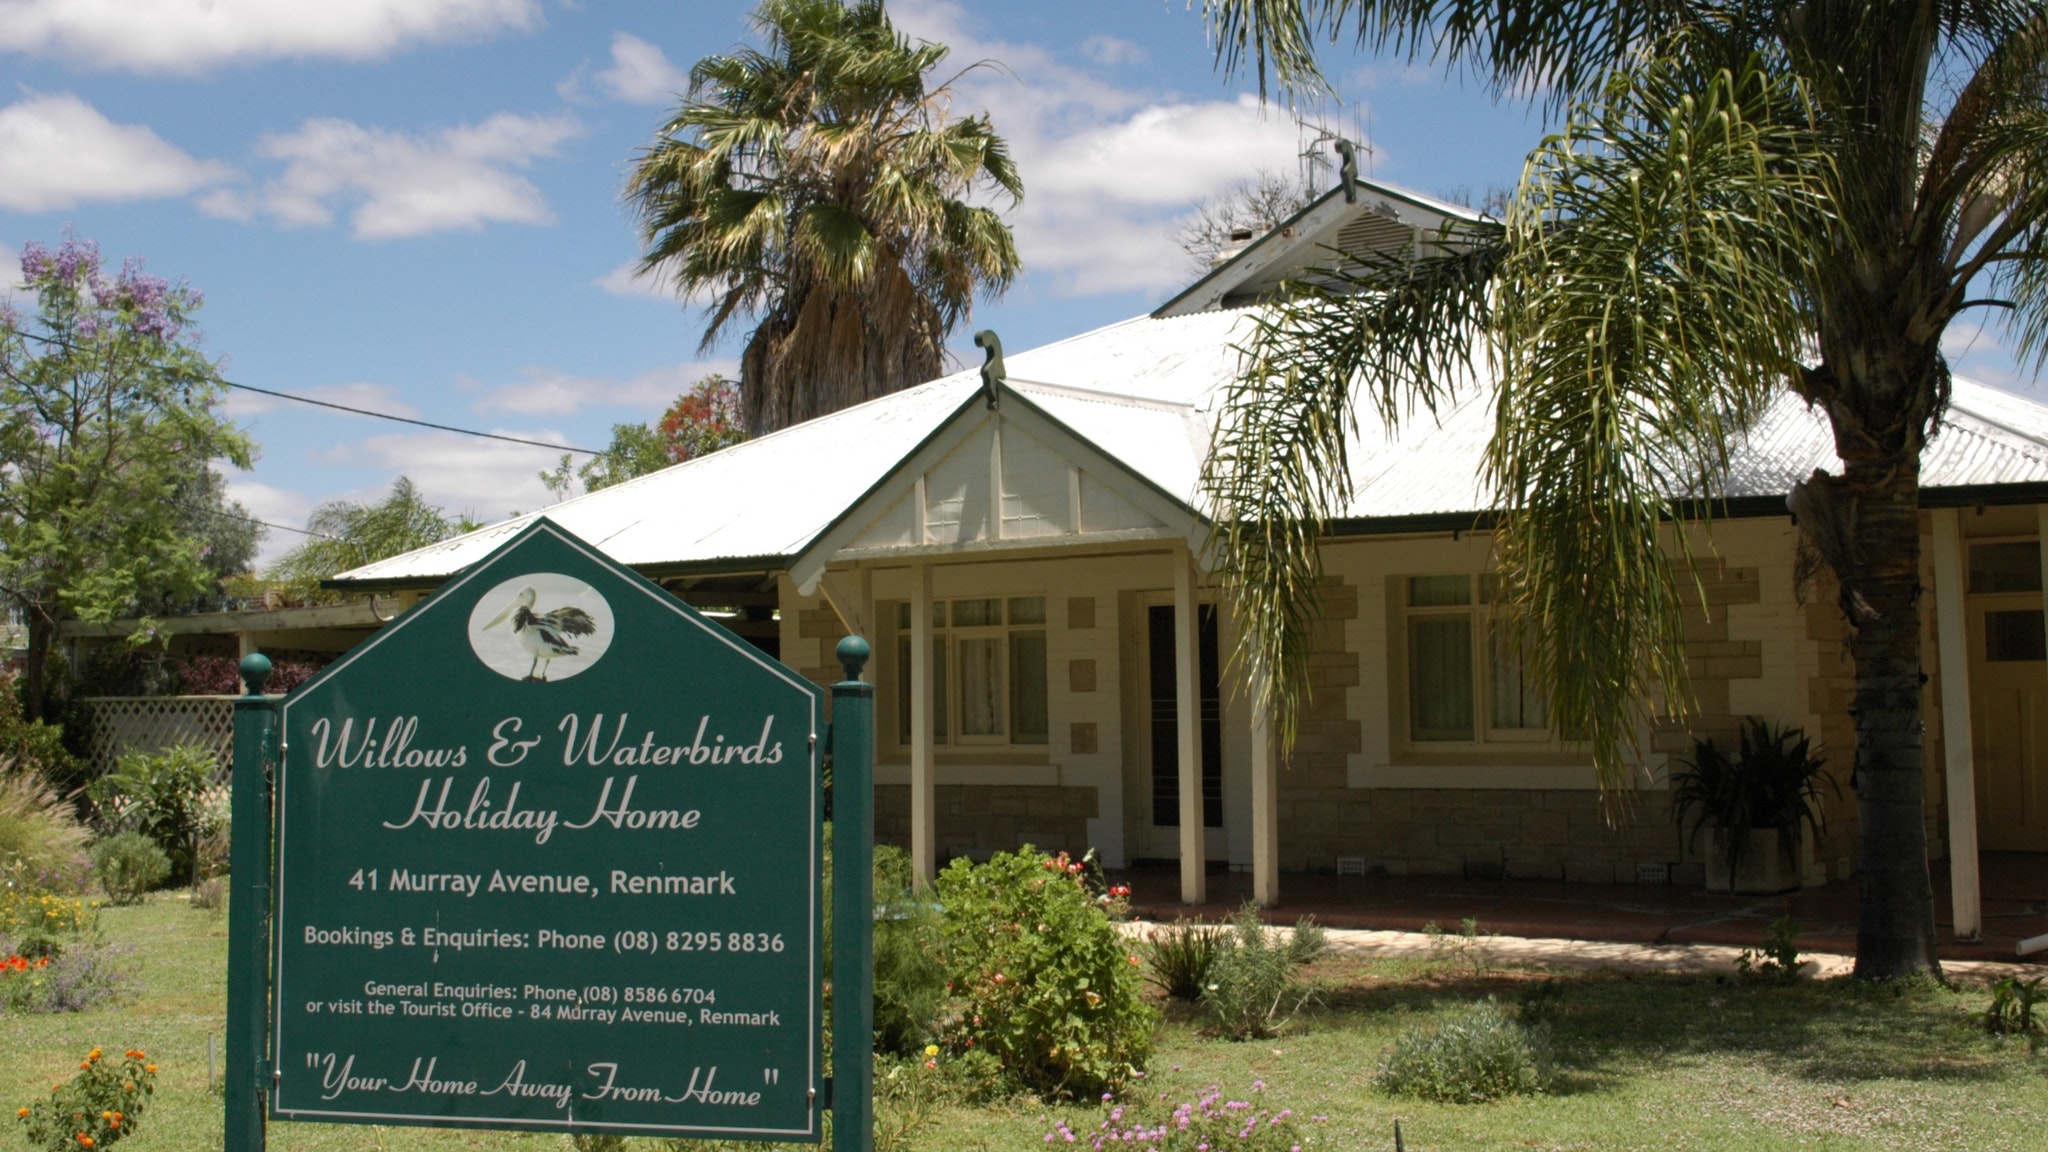 Renmark Holiday Home Willows  Waterbirds - Melbourne Tourism